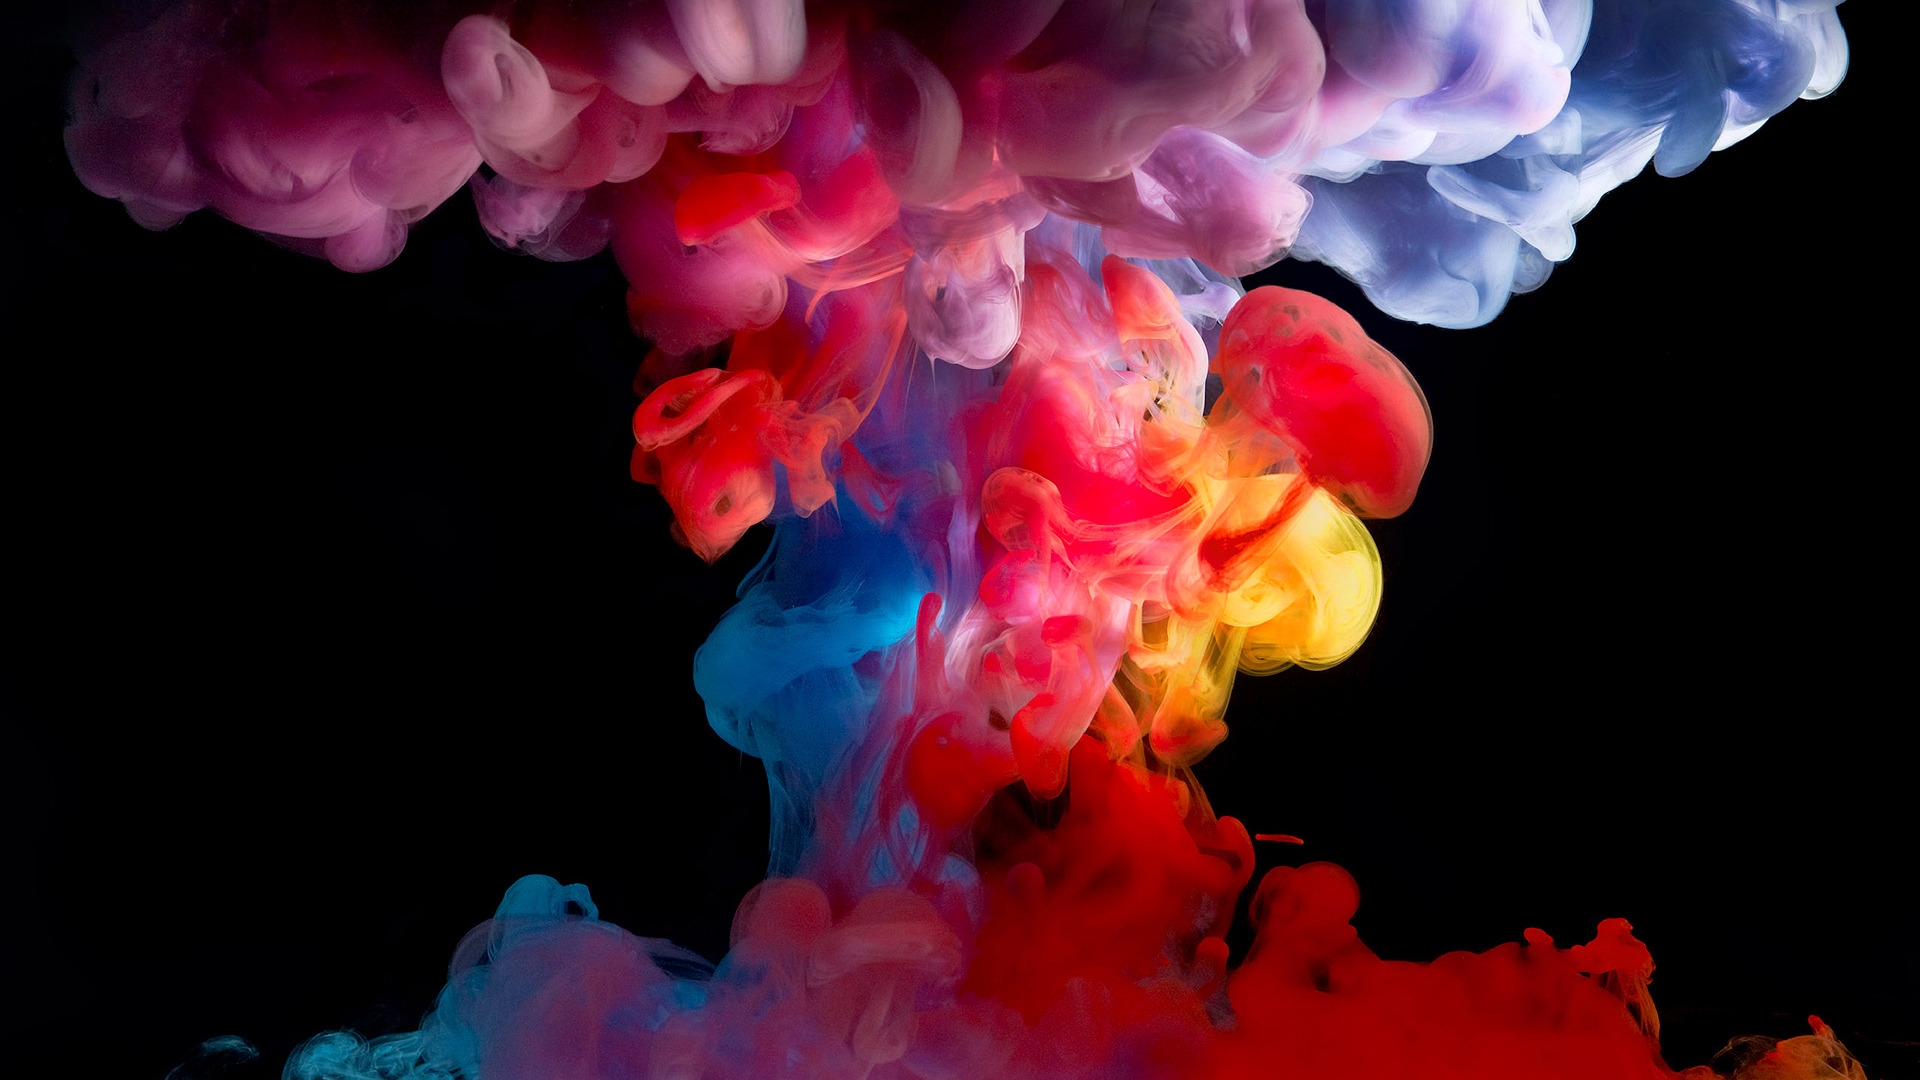 Colored Smoke Paint for 1920 x 1080 HDTV 1080p resolution